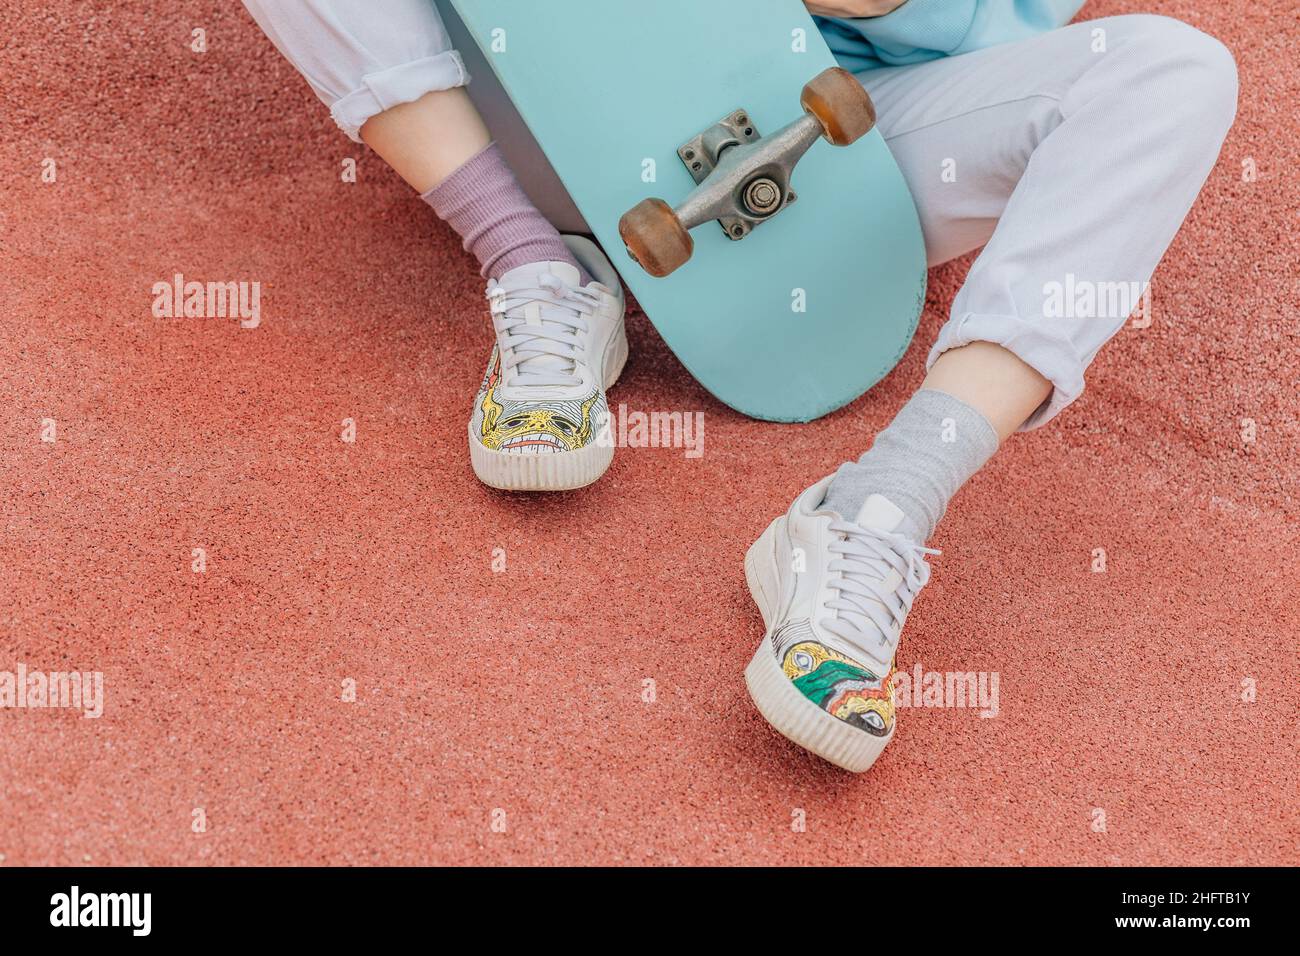 Unrecognizable person on skateboard, legs in sneakers with laces. Stock Photo